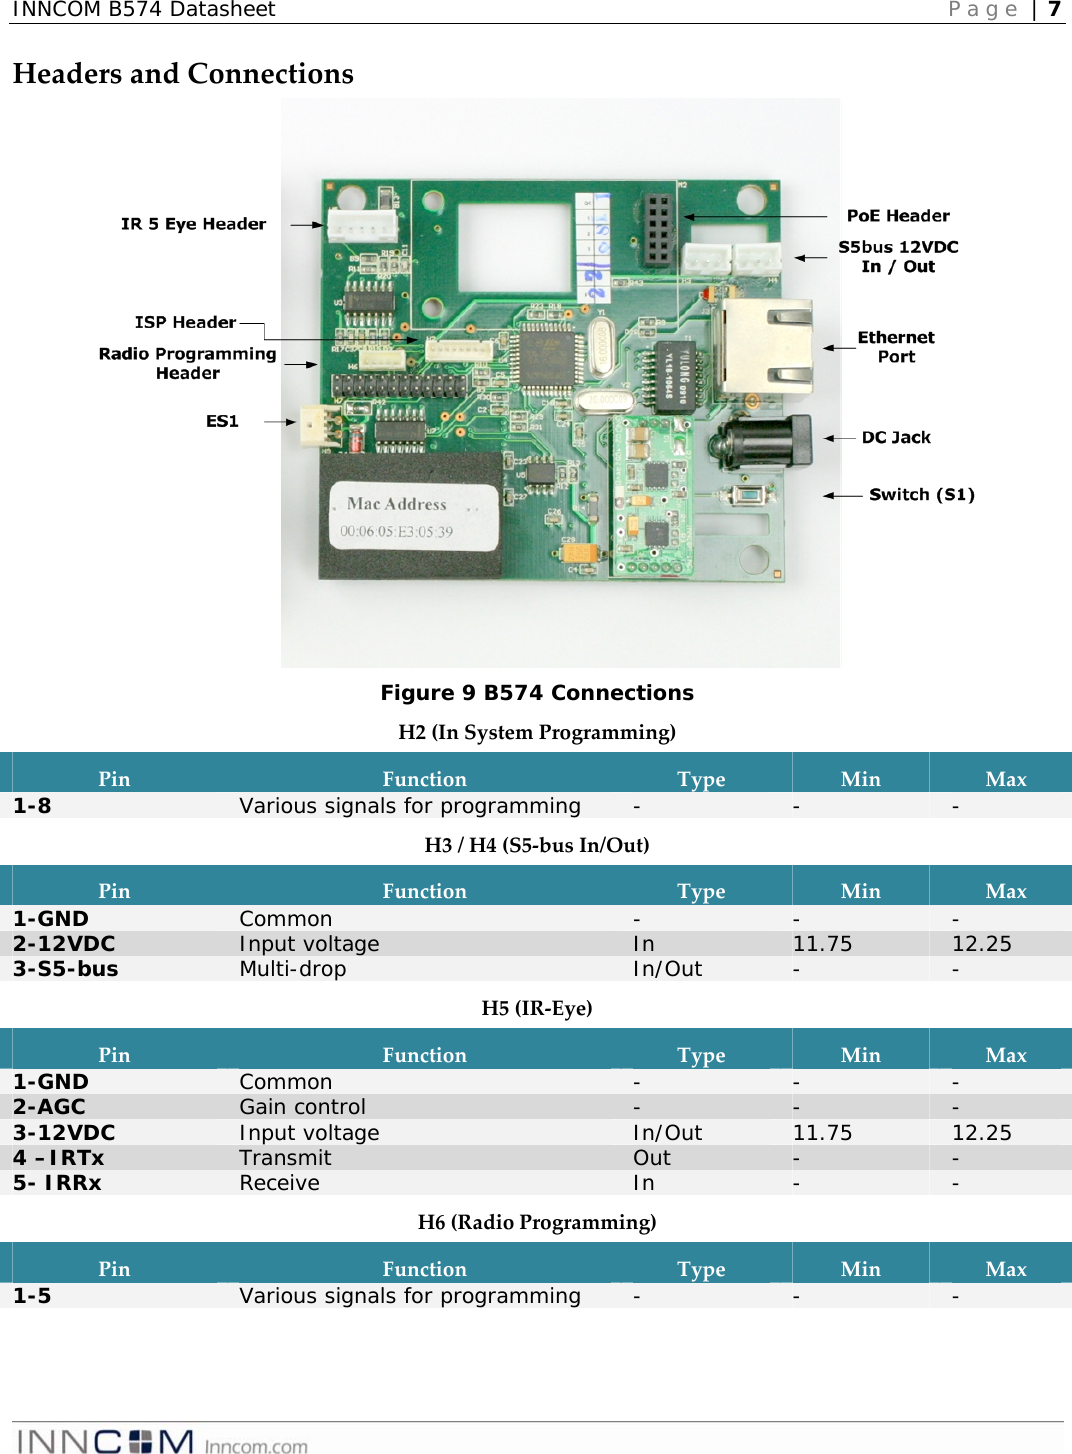 INNCOM B574 Datasheet   Page | 7   HeadersandConnections Figure 9 B574 Connections H2(InSystemProgramming)PinFunctionTypeMinMax1-8  Various signals for programming   -  -  - H3/H4(S5‐busIn/Out)PinFunctionTypeMinMax1-GND  Common  -  -  - 2-12VDC  Input voltage  In  11.75  12.25 3-S5-bus  Multi-drop   In/Out  -  - H5(IR‐Eye)PinFunctionTypeMinMax1-GND  Common  -  -  - 2-AGC  Gain control  -  -  - 3-12VDC  Input voltage   In/Out  11.75  12.25 4 –IRTx  Transmit  Out  -  - 5- IRRx  Receive  In  -  - H6(RadioProgramming)PinFunctionTypeMinMax1-5  Various signals for programming  -  -  - 